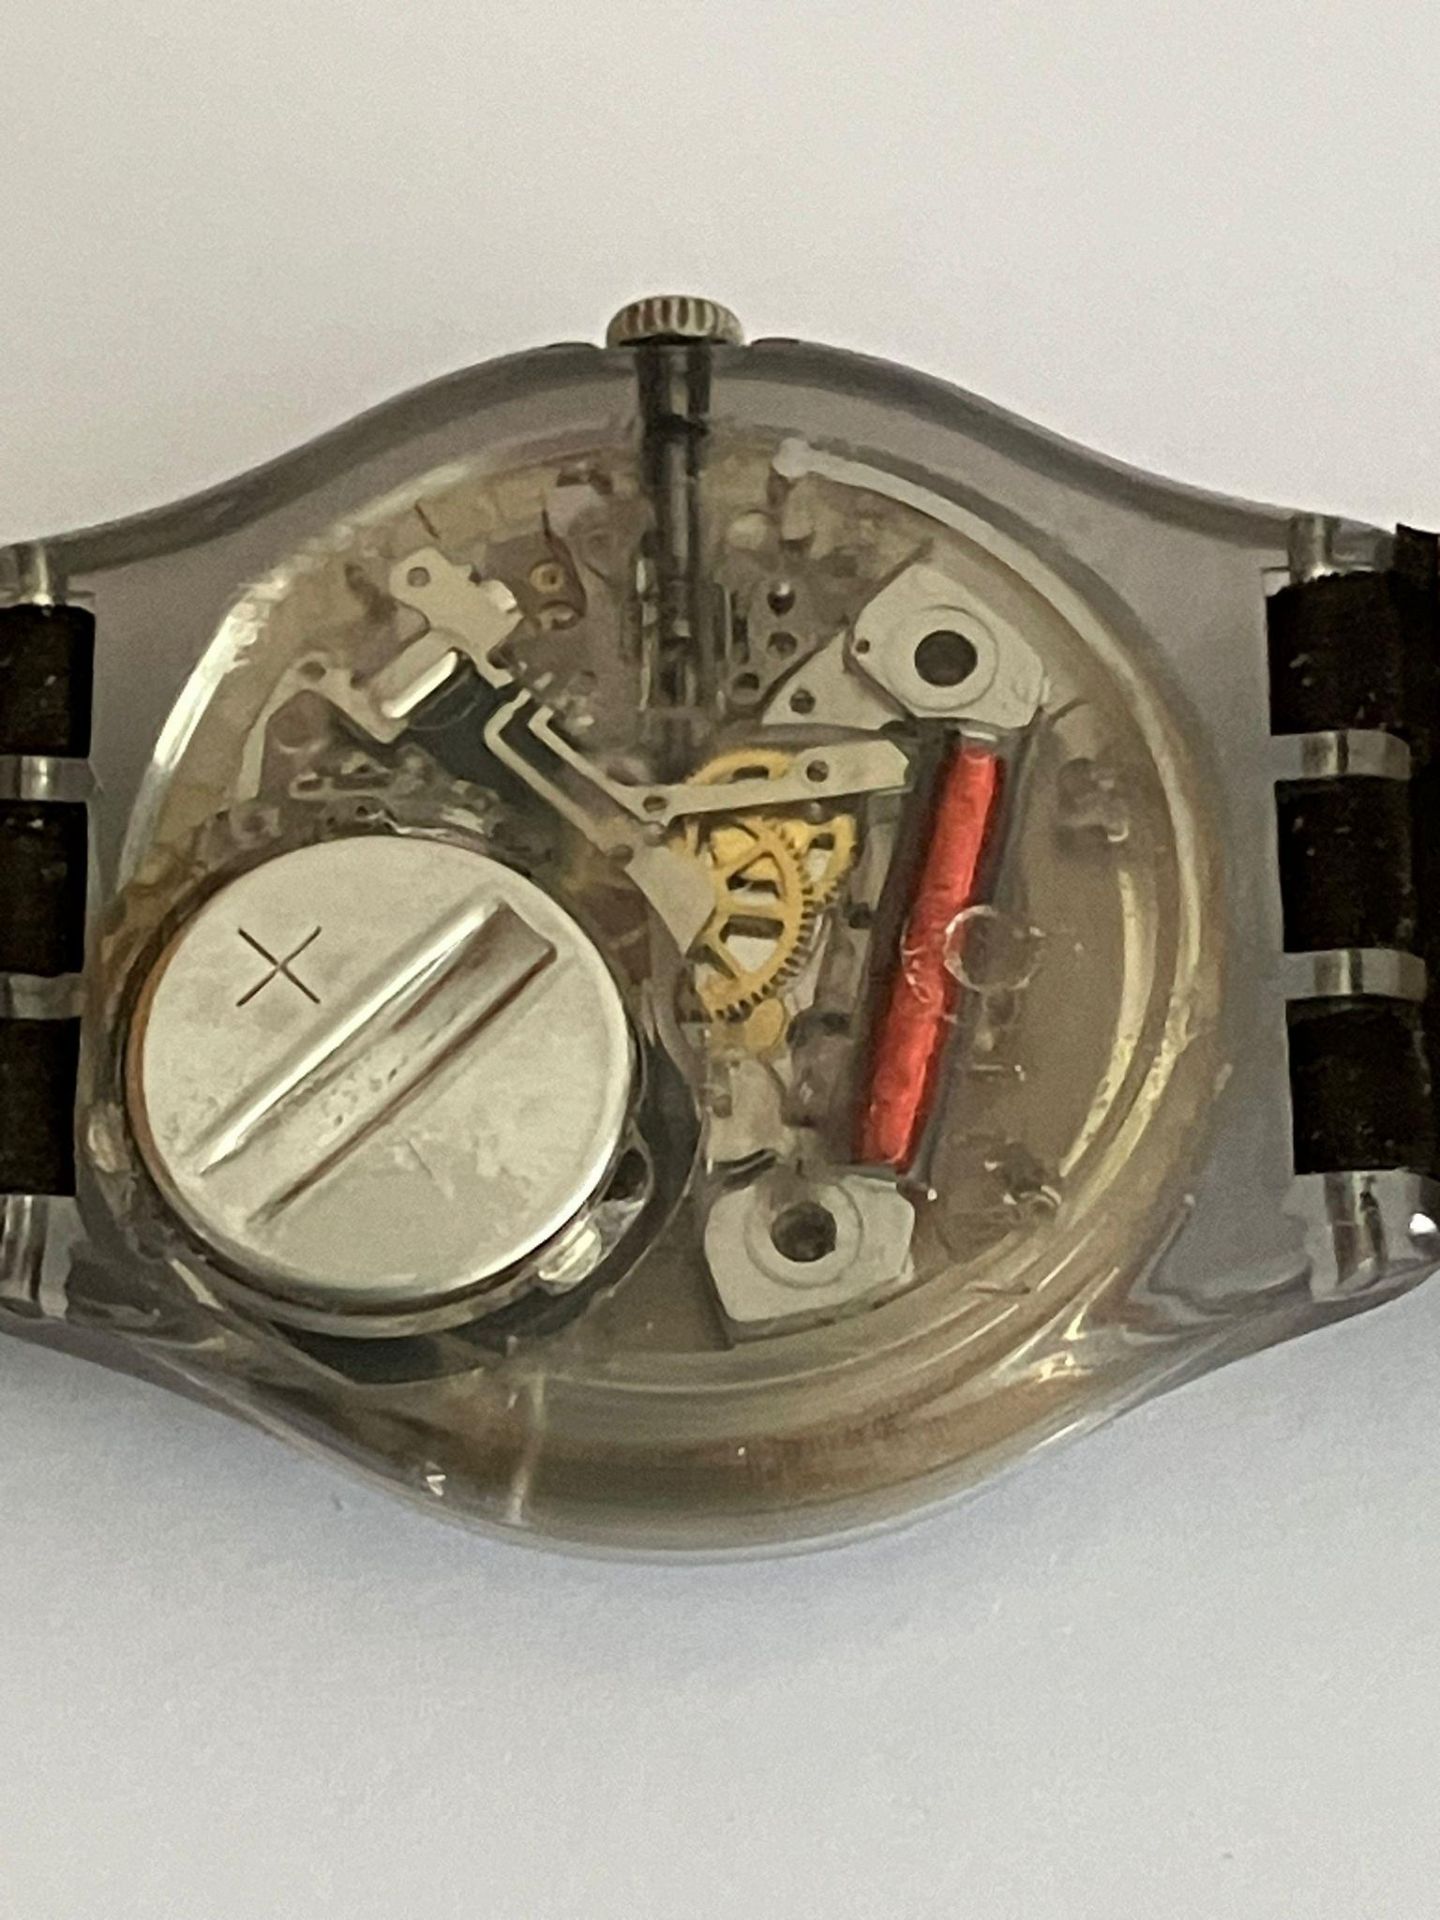 Vintage SWATCH WATCH. Blue face model with sweeping second hand and date window . Perspex case - Image 2 of 3